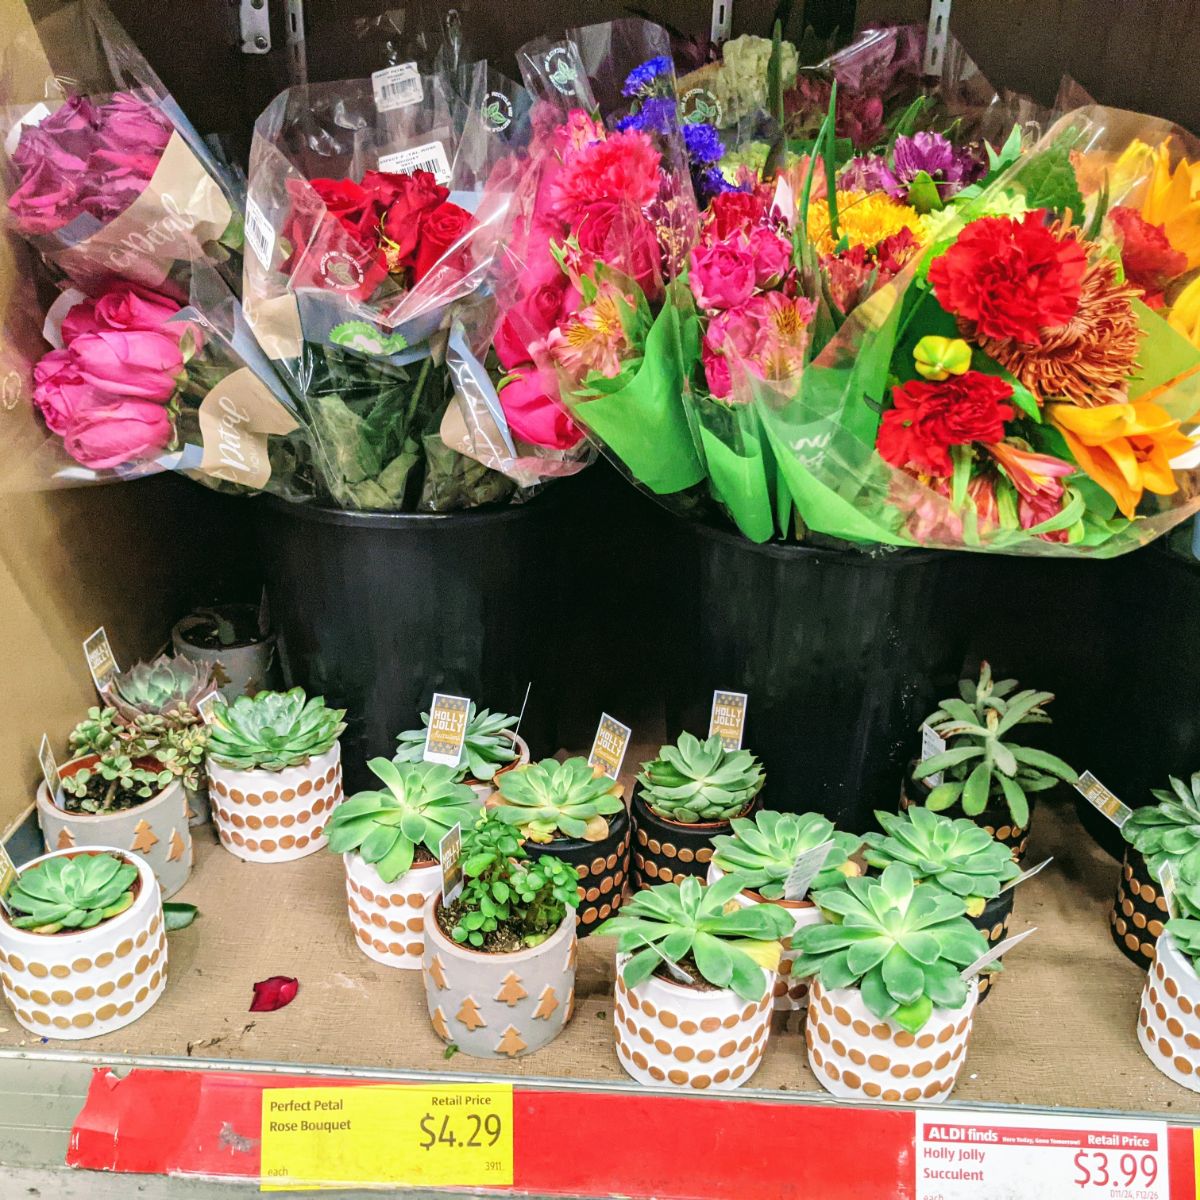 Succulents and bouquets of flowers for sale at Aldi in December 2021